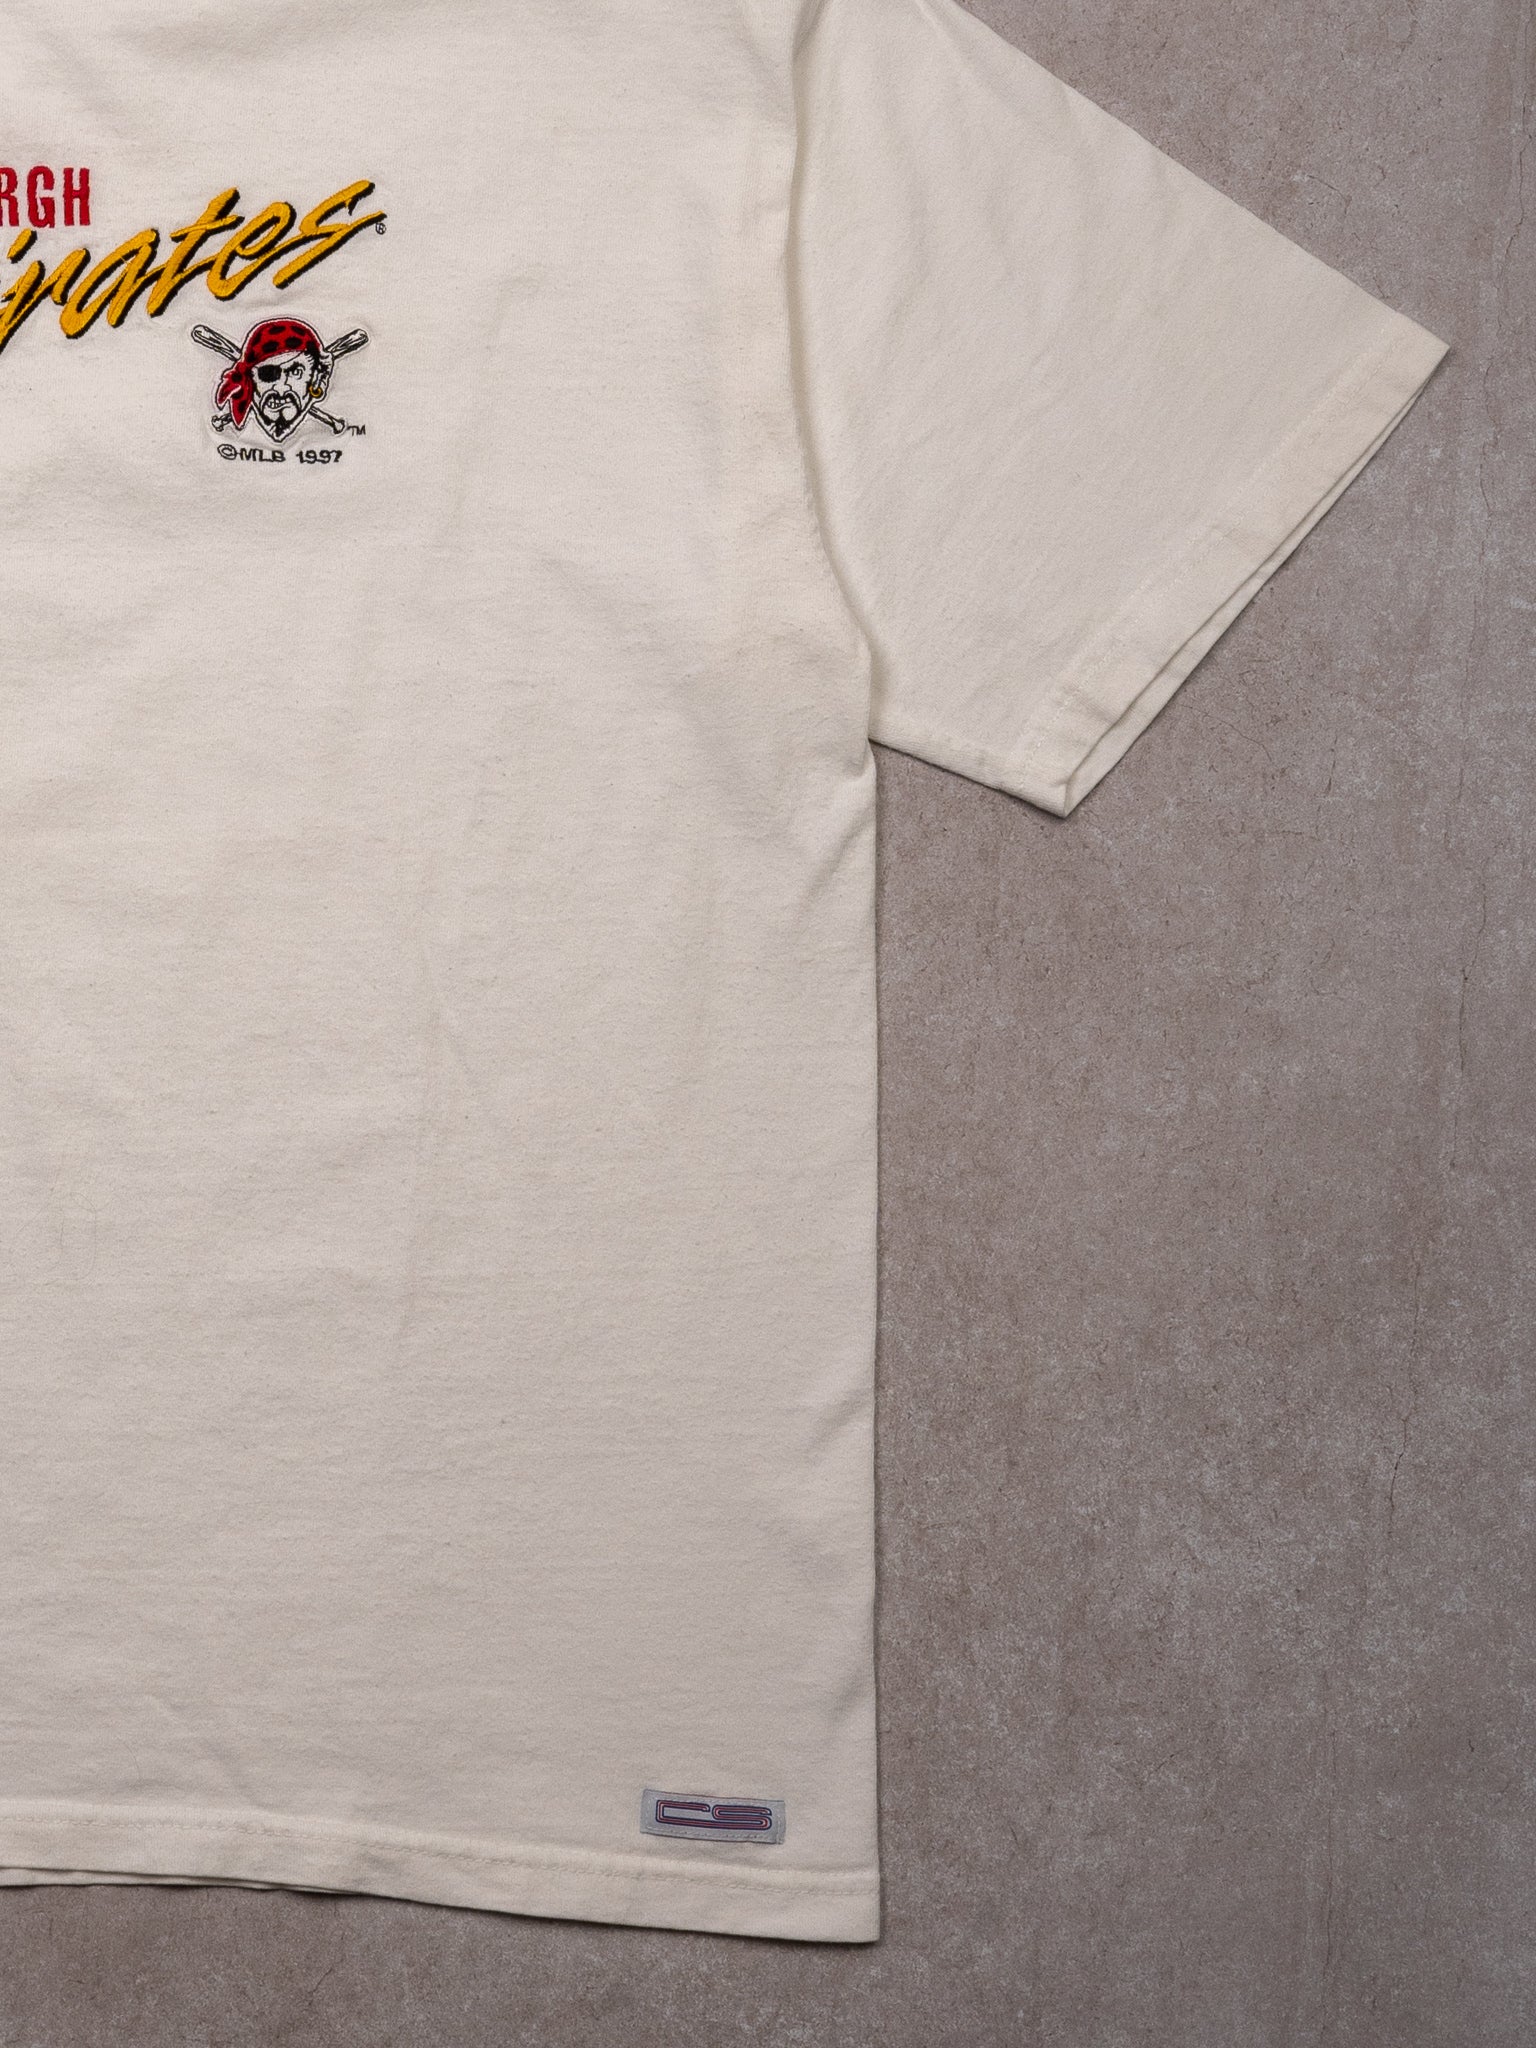 Vintage '97 White Pittsburgh Pirates Embroided Tee (L)